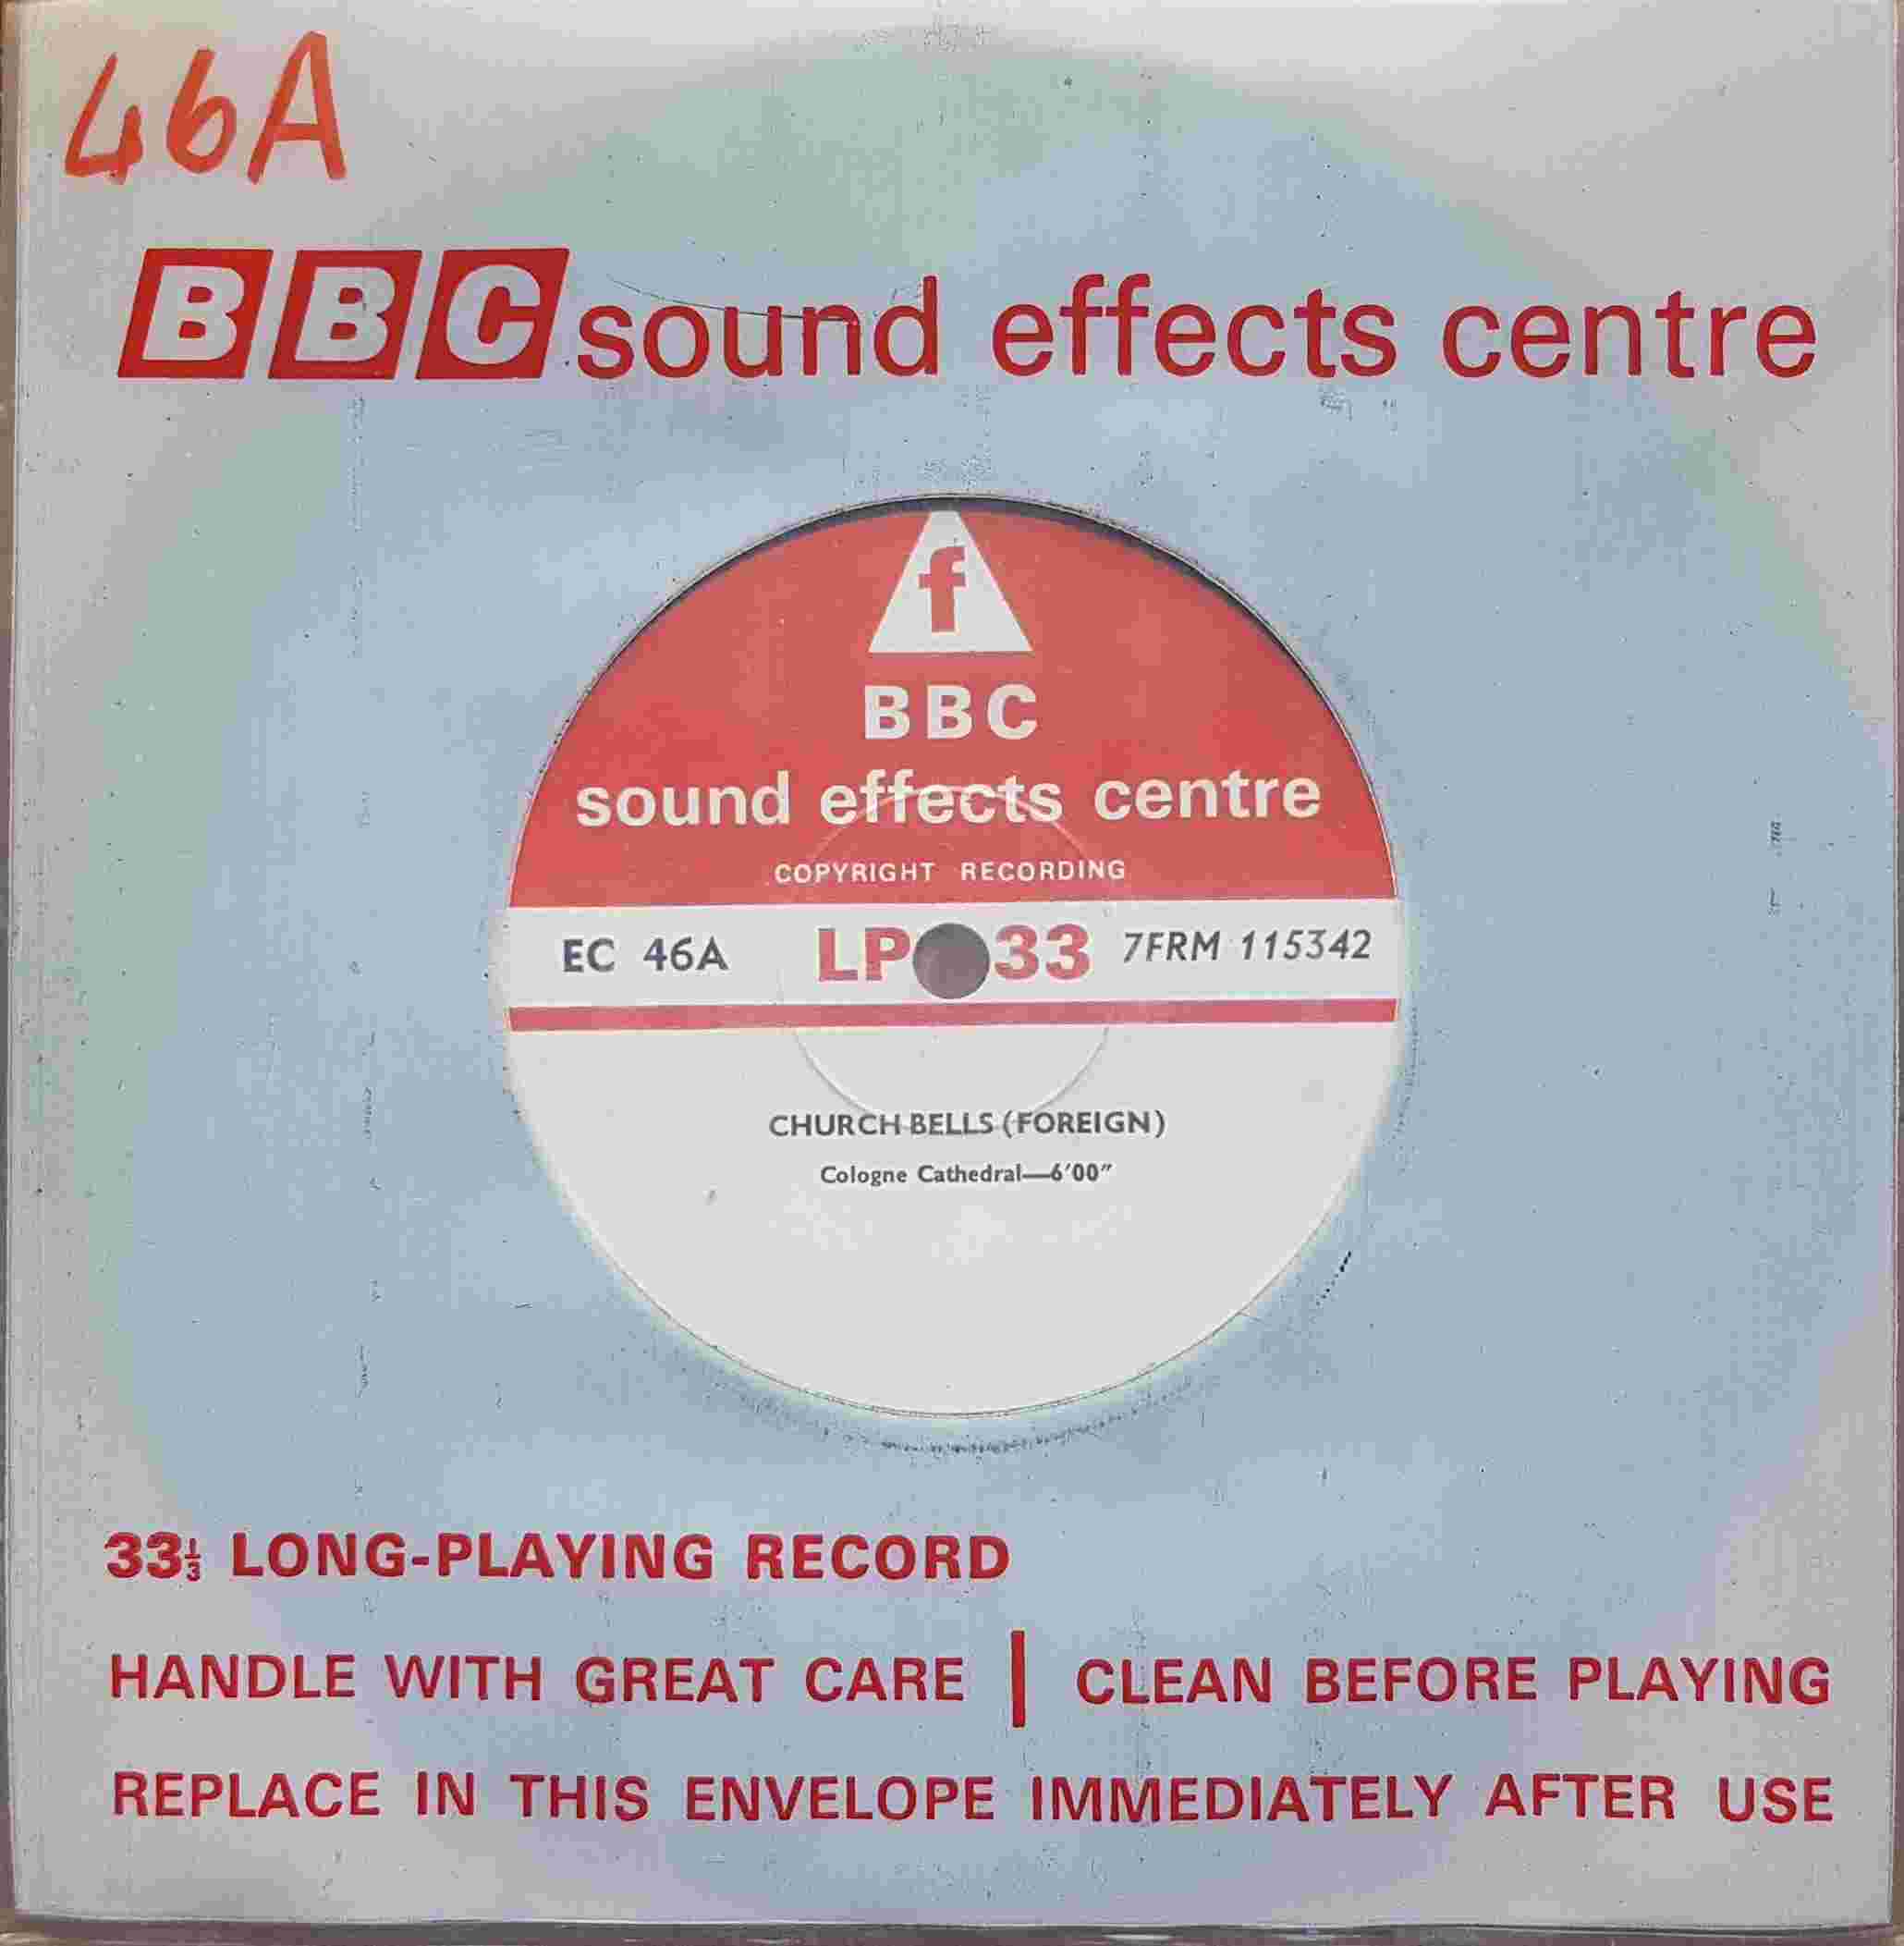 Picture of EC 46A Church bells (Foreign) single by artist Not registered from the BBC records and Tapes library